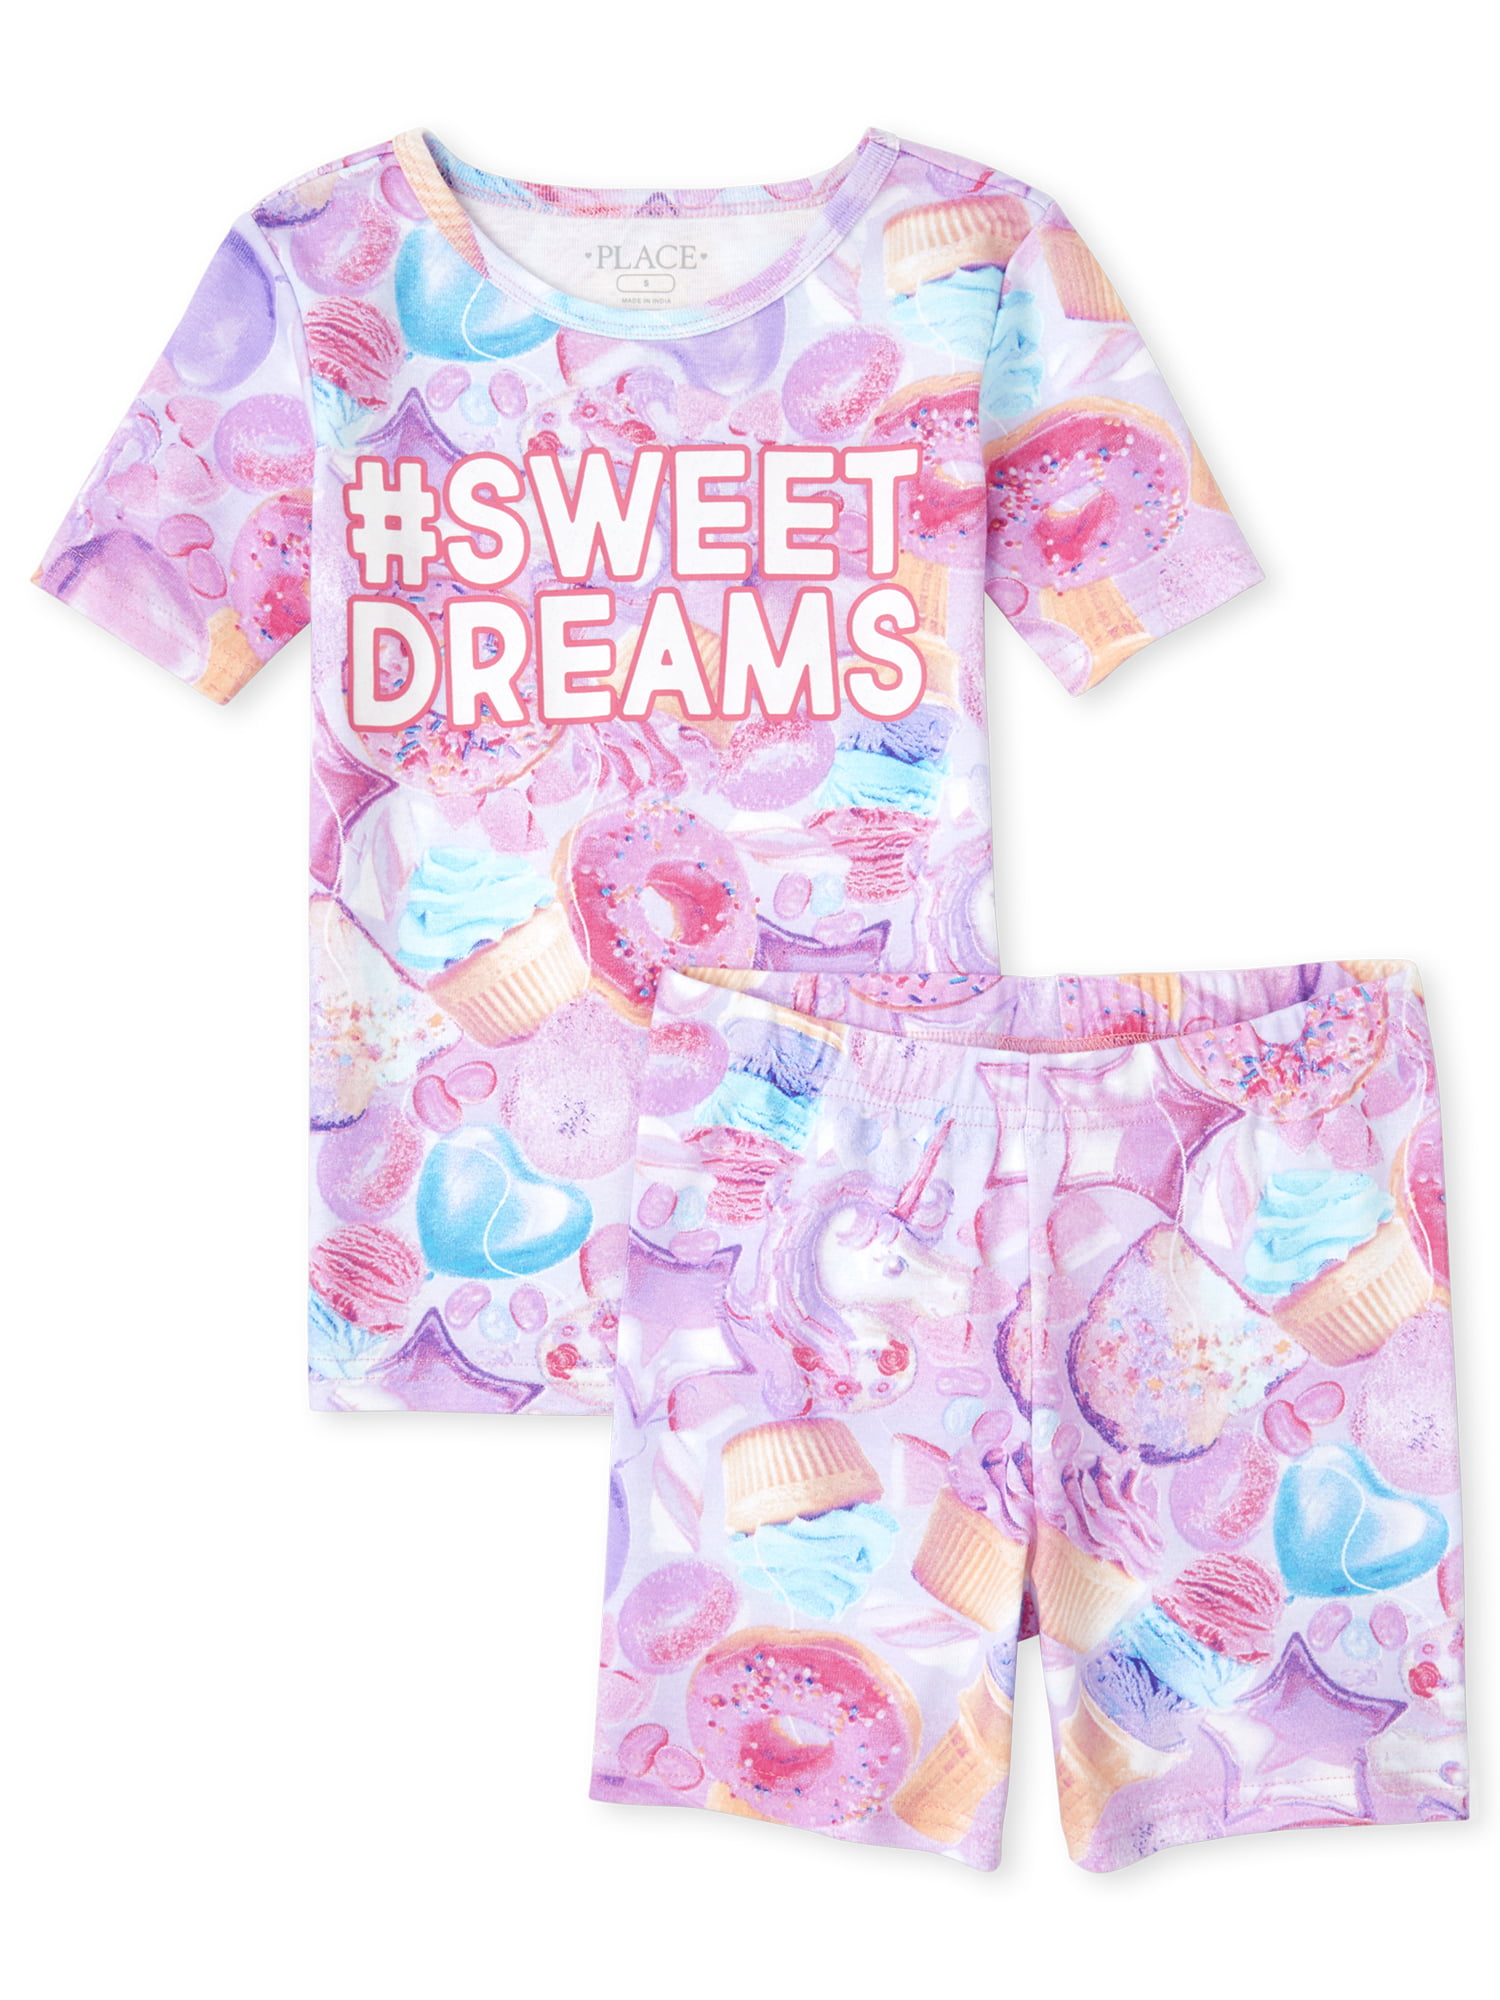 For Kids, Sweet Dreams Are Made of These